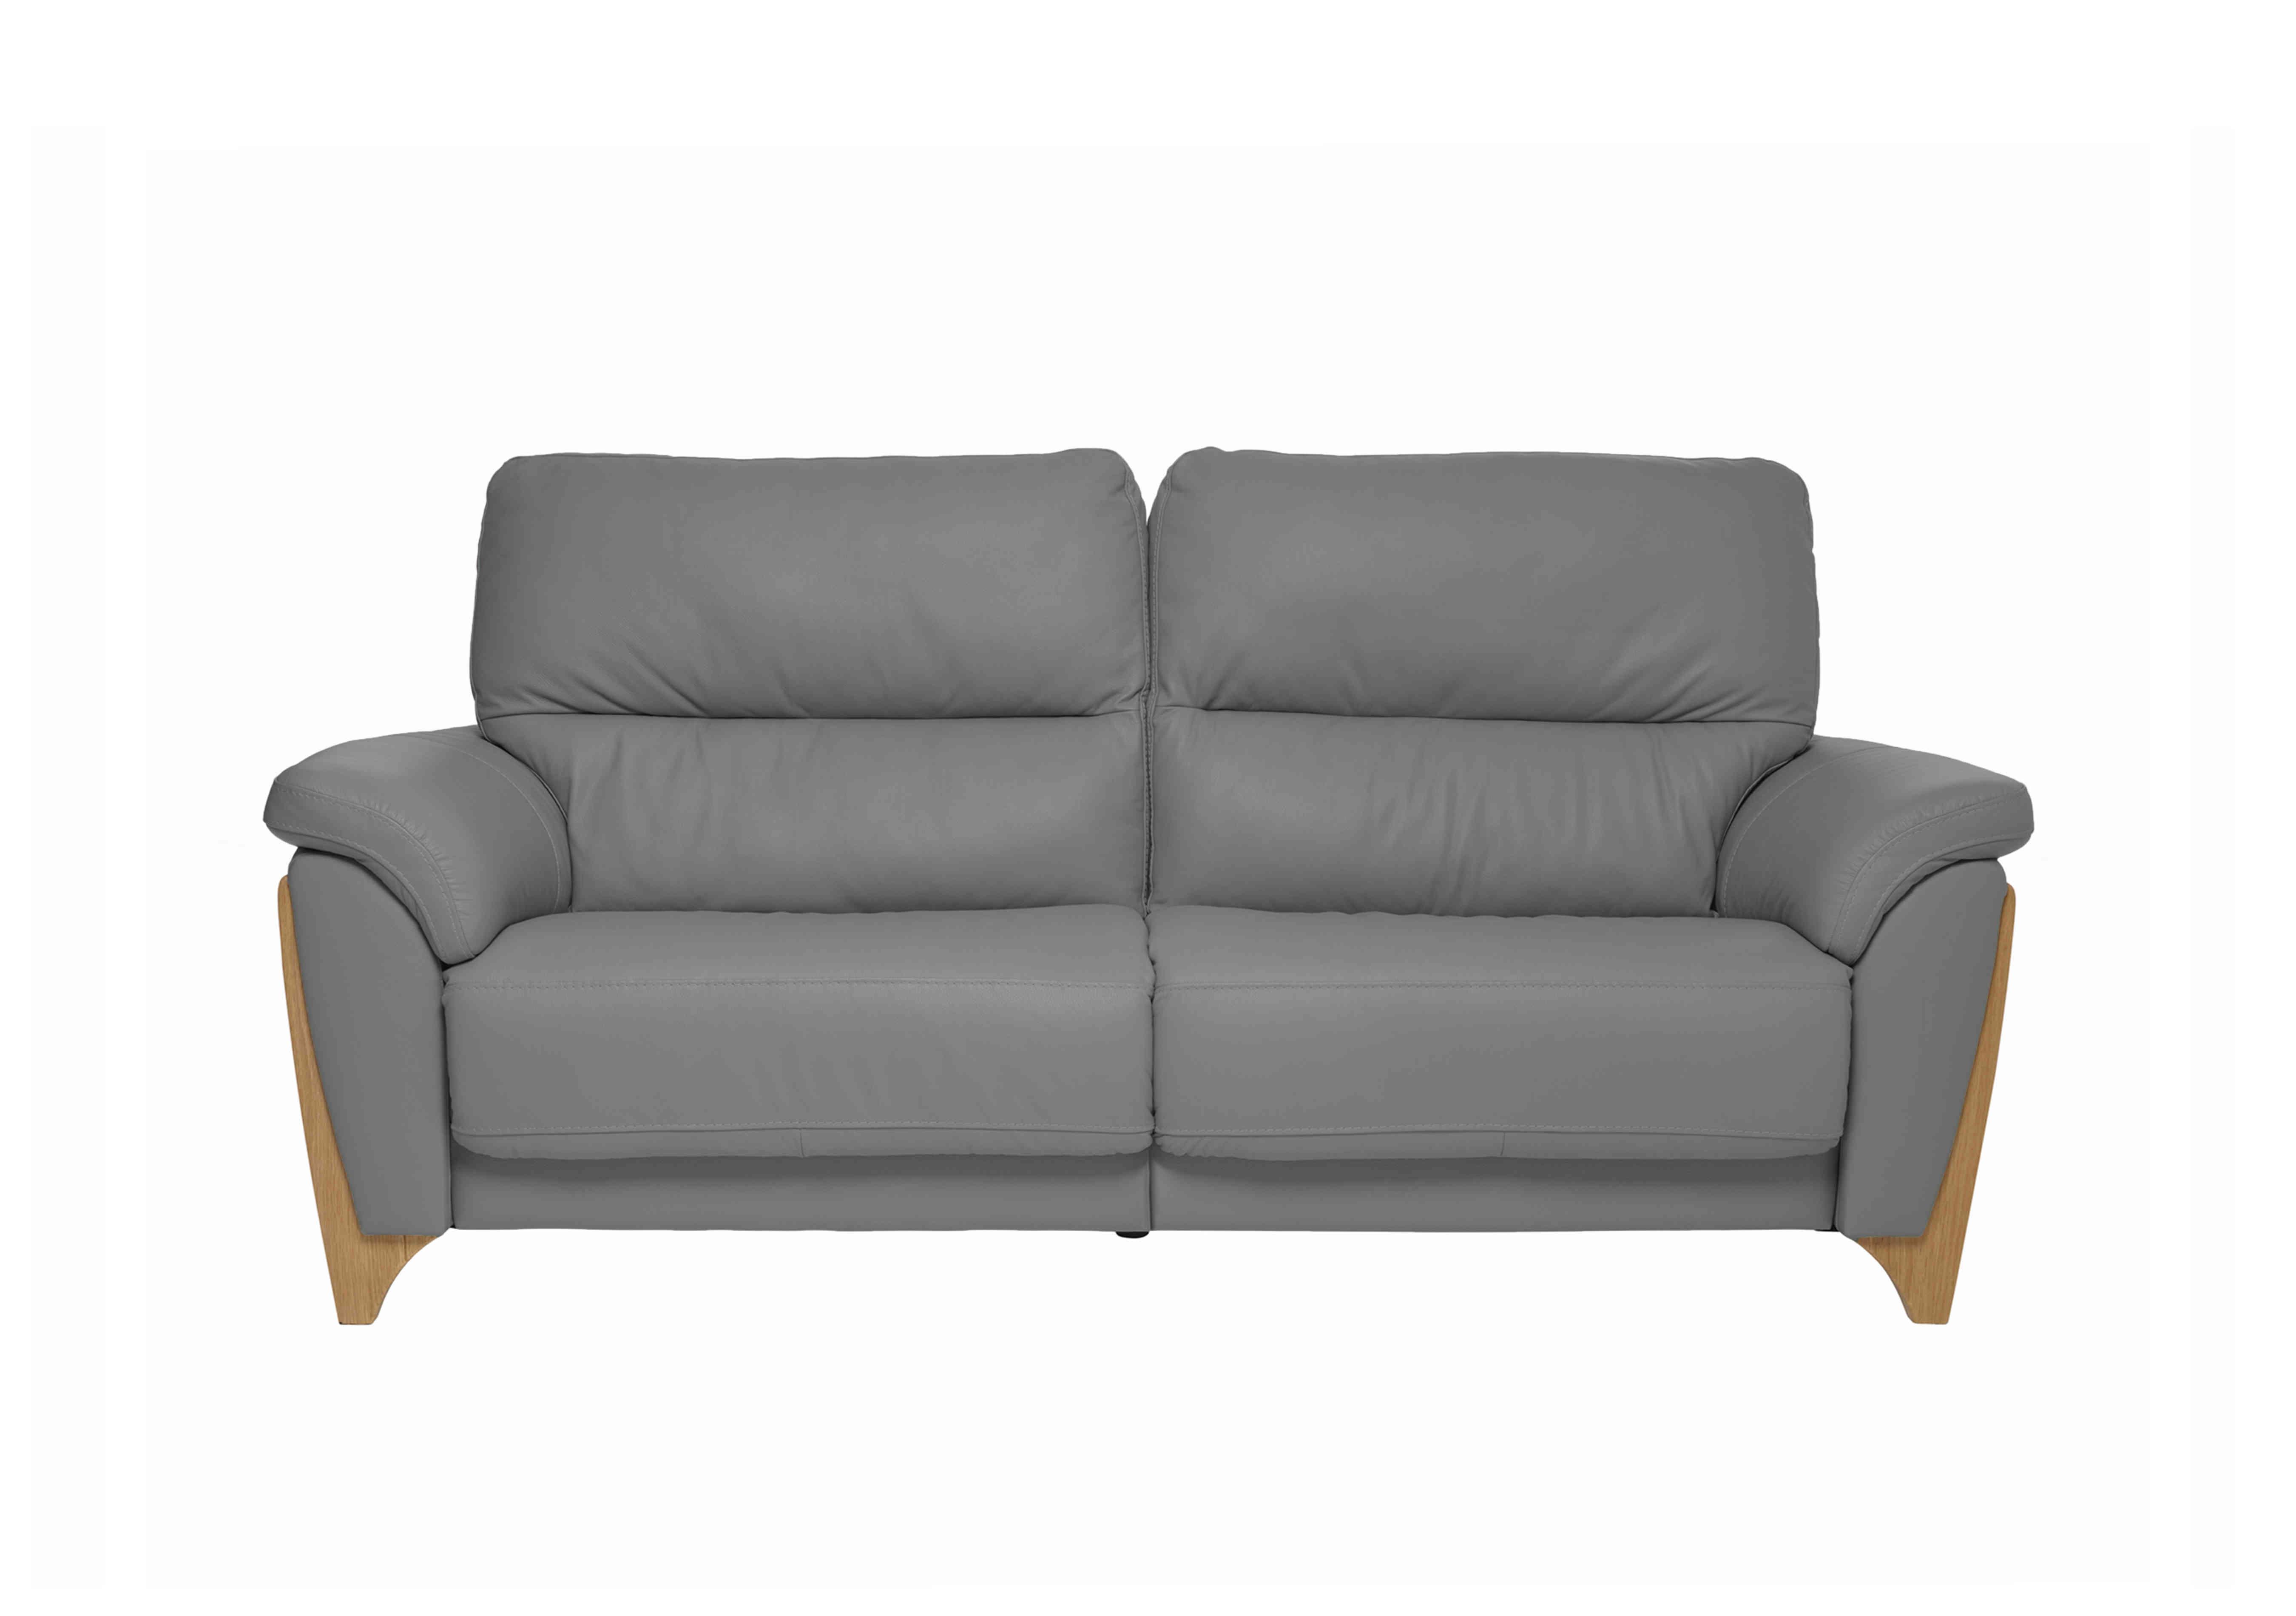 Enna Large Leather Power Recliner Sofa in L956 on Furniture Village